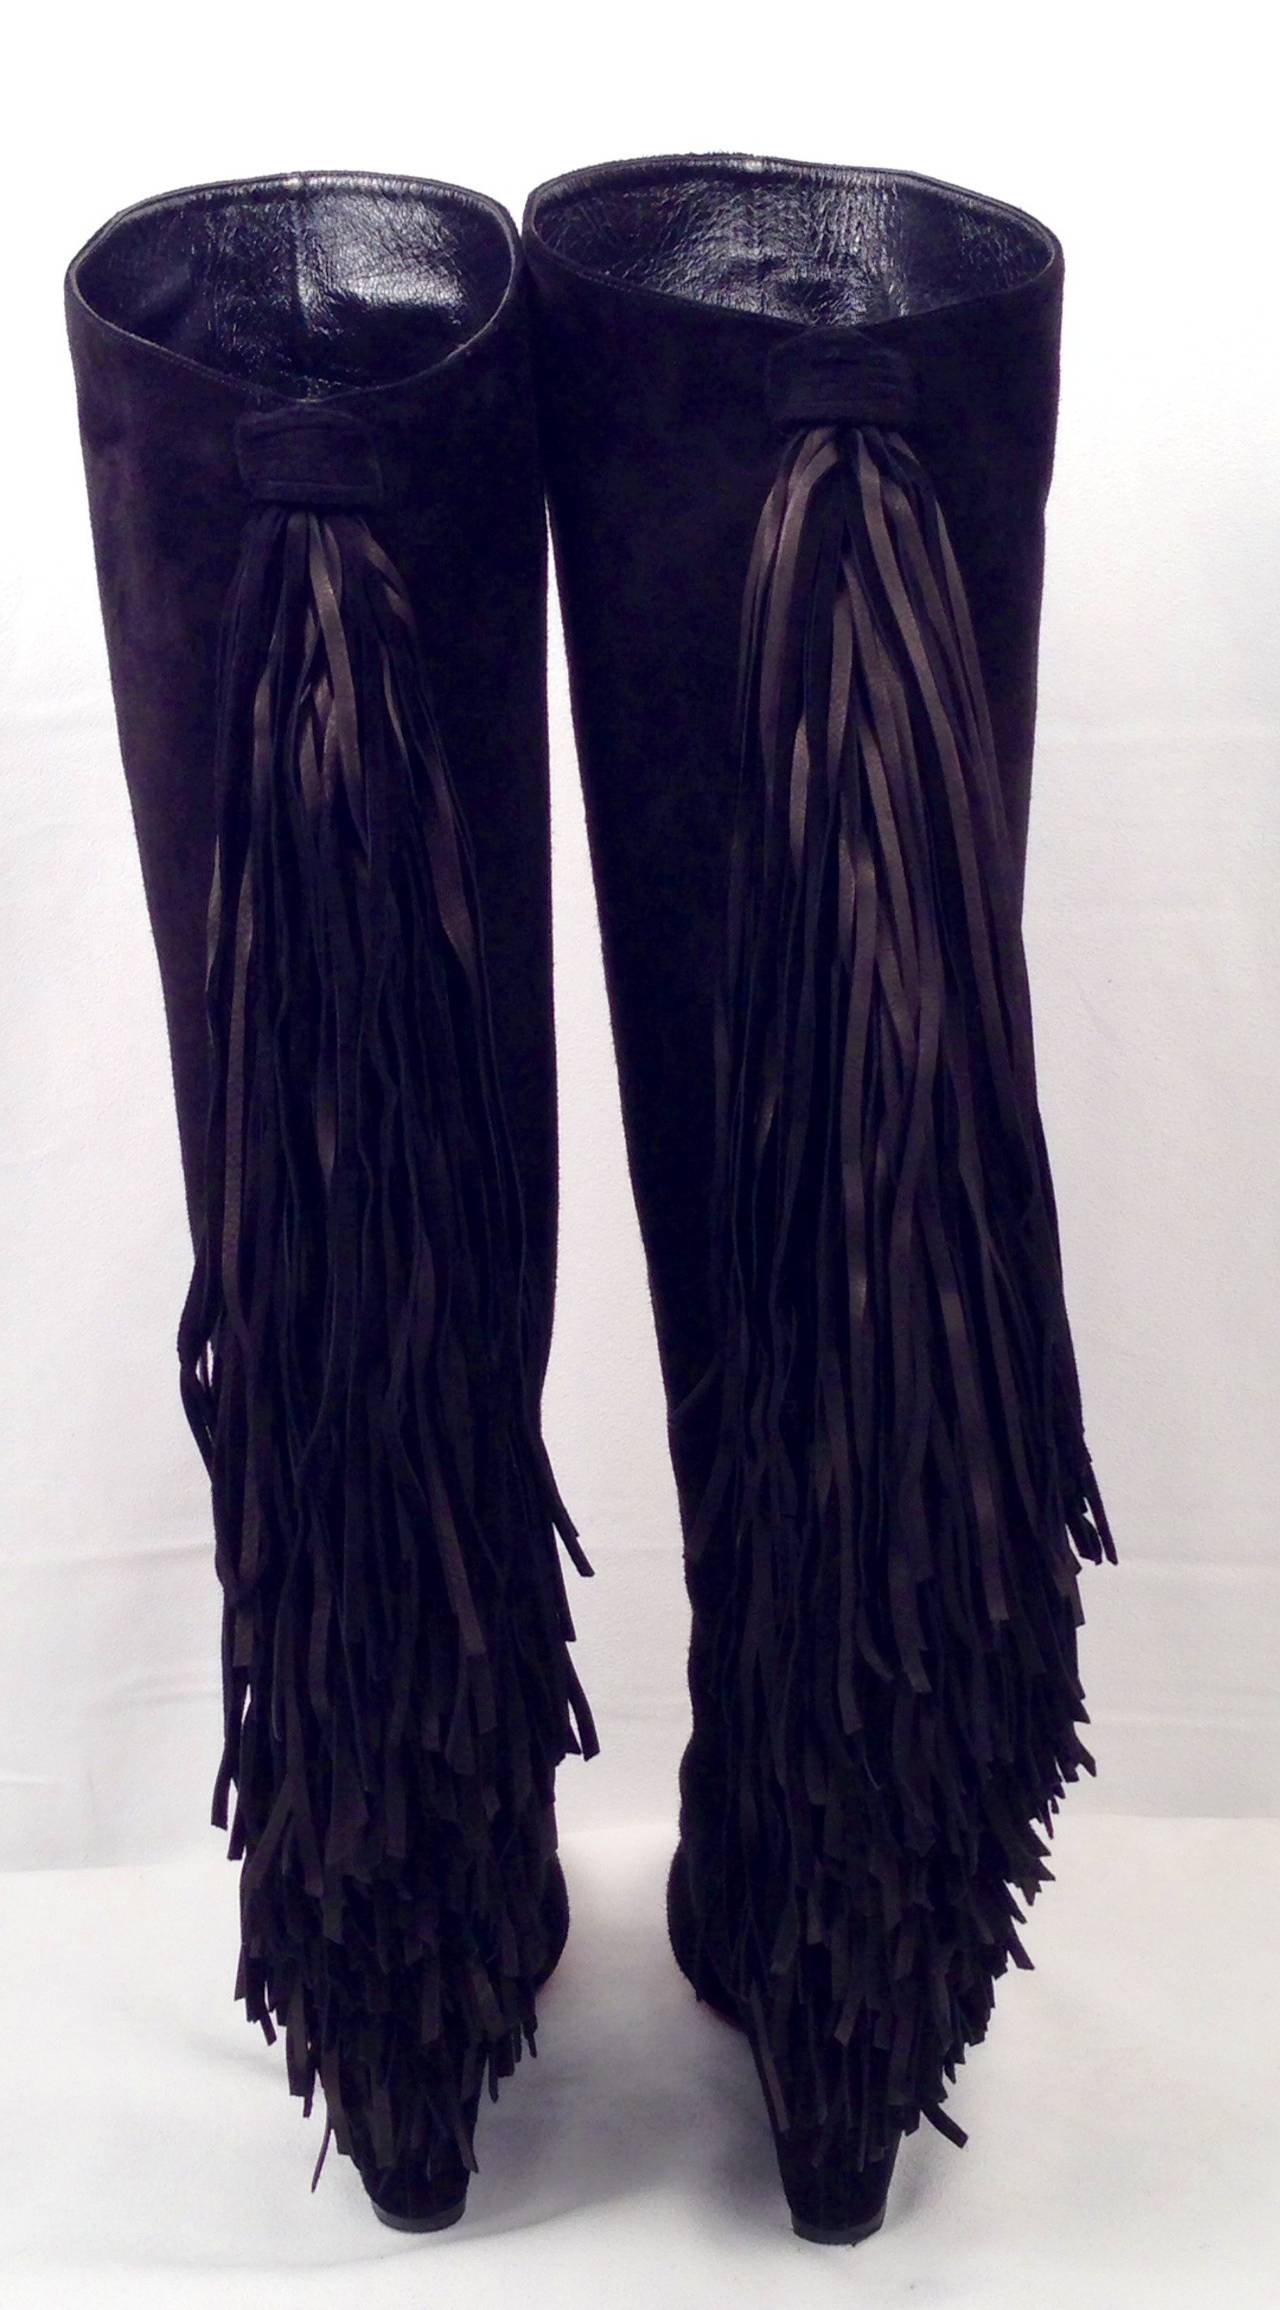 Christian Louboutin Black Suede Knee Boots With Fringe In Excellent Condition For Sale In Palm Beach, FL